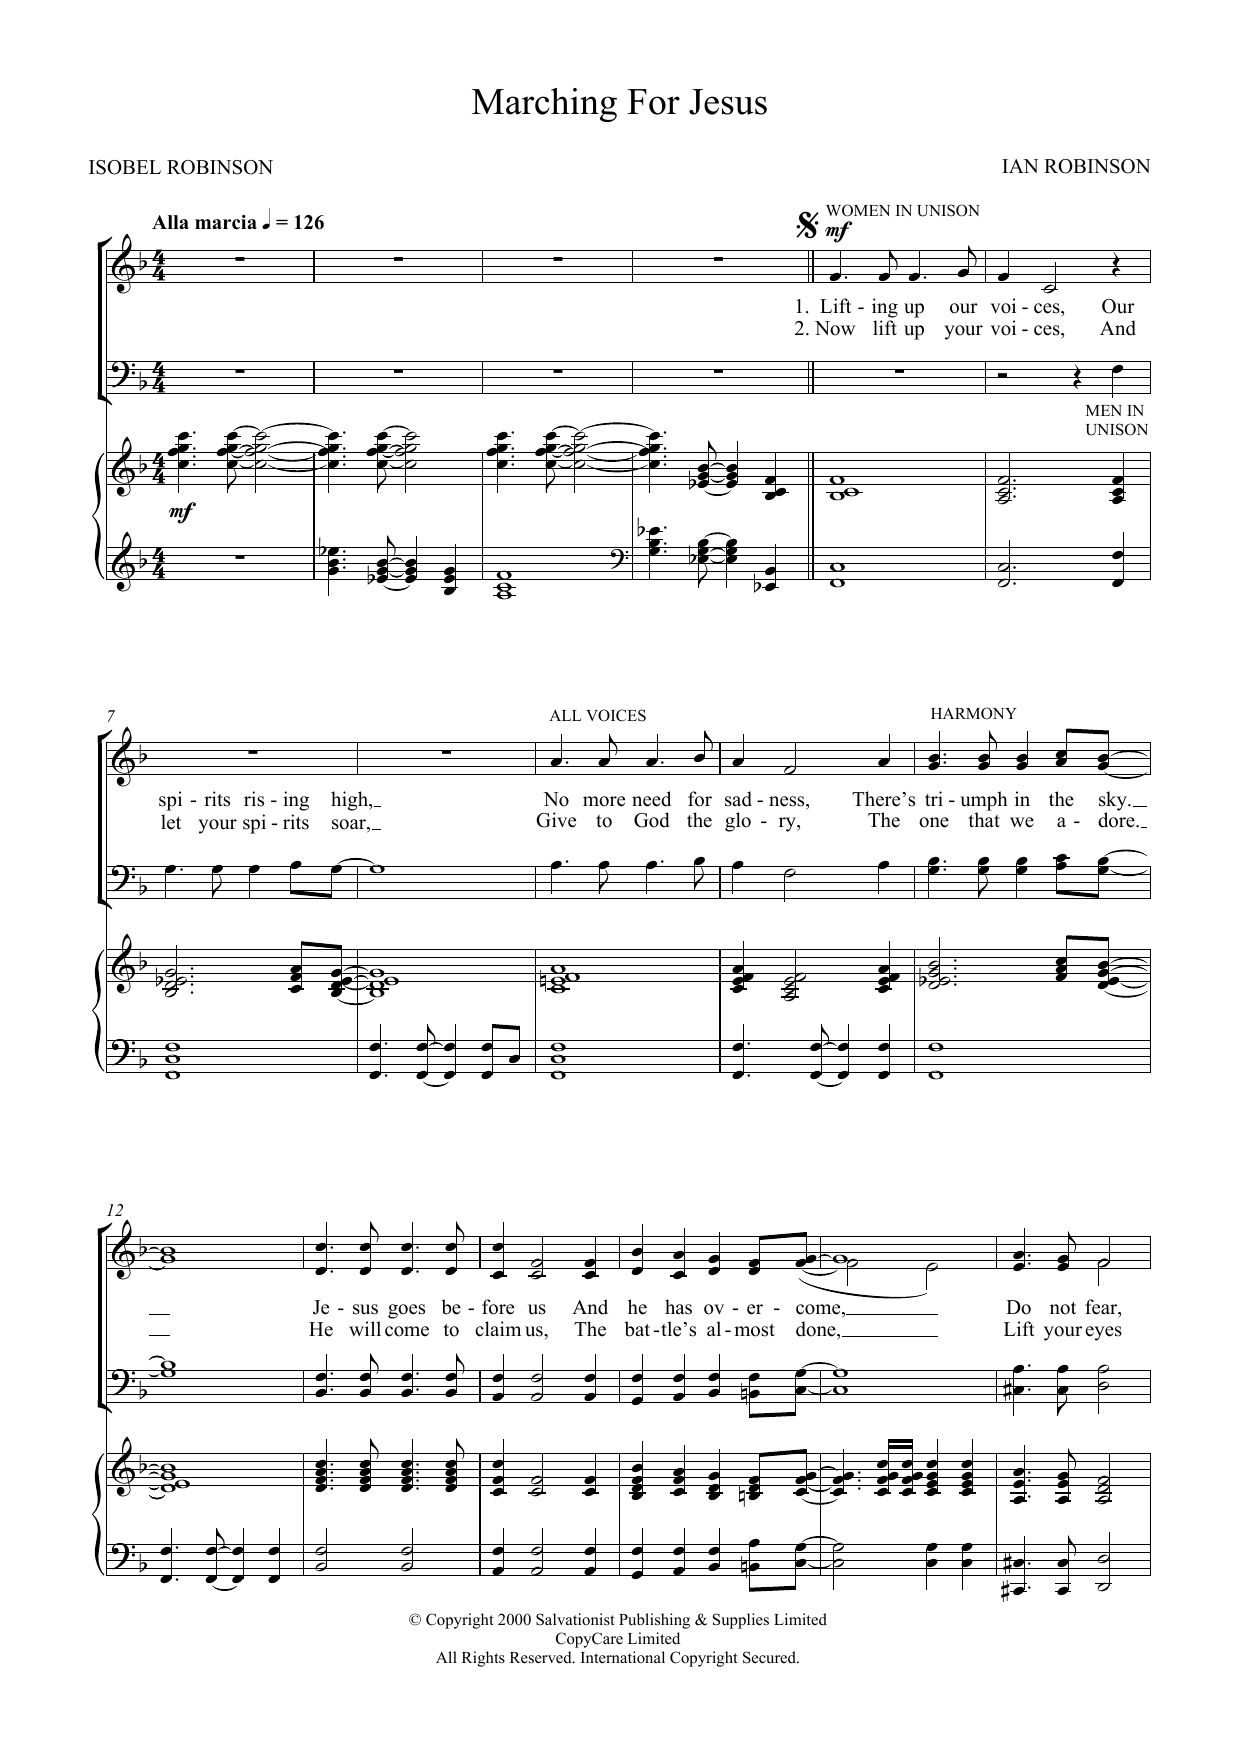 Download The Salvation Army Marching For Jesus Sheet Music